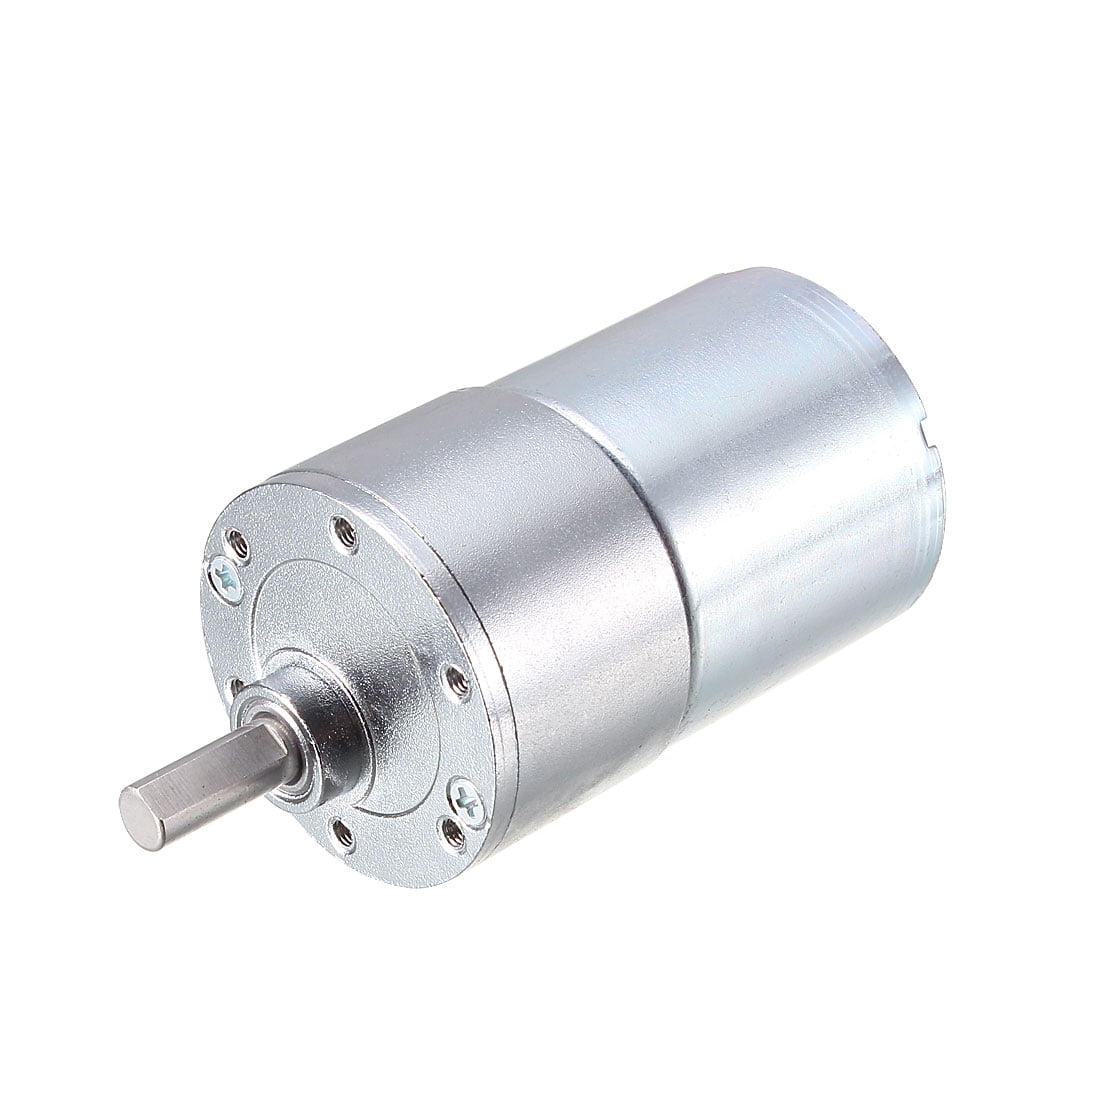 Luckya Gear Motor with 2.5-110RPM Miniature Low Speed Large Moment of Force for CW/CCW AC220V